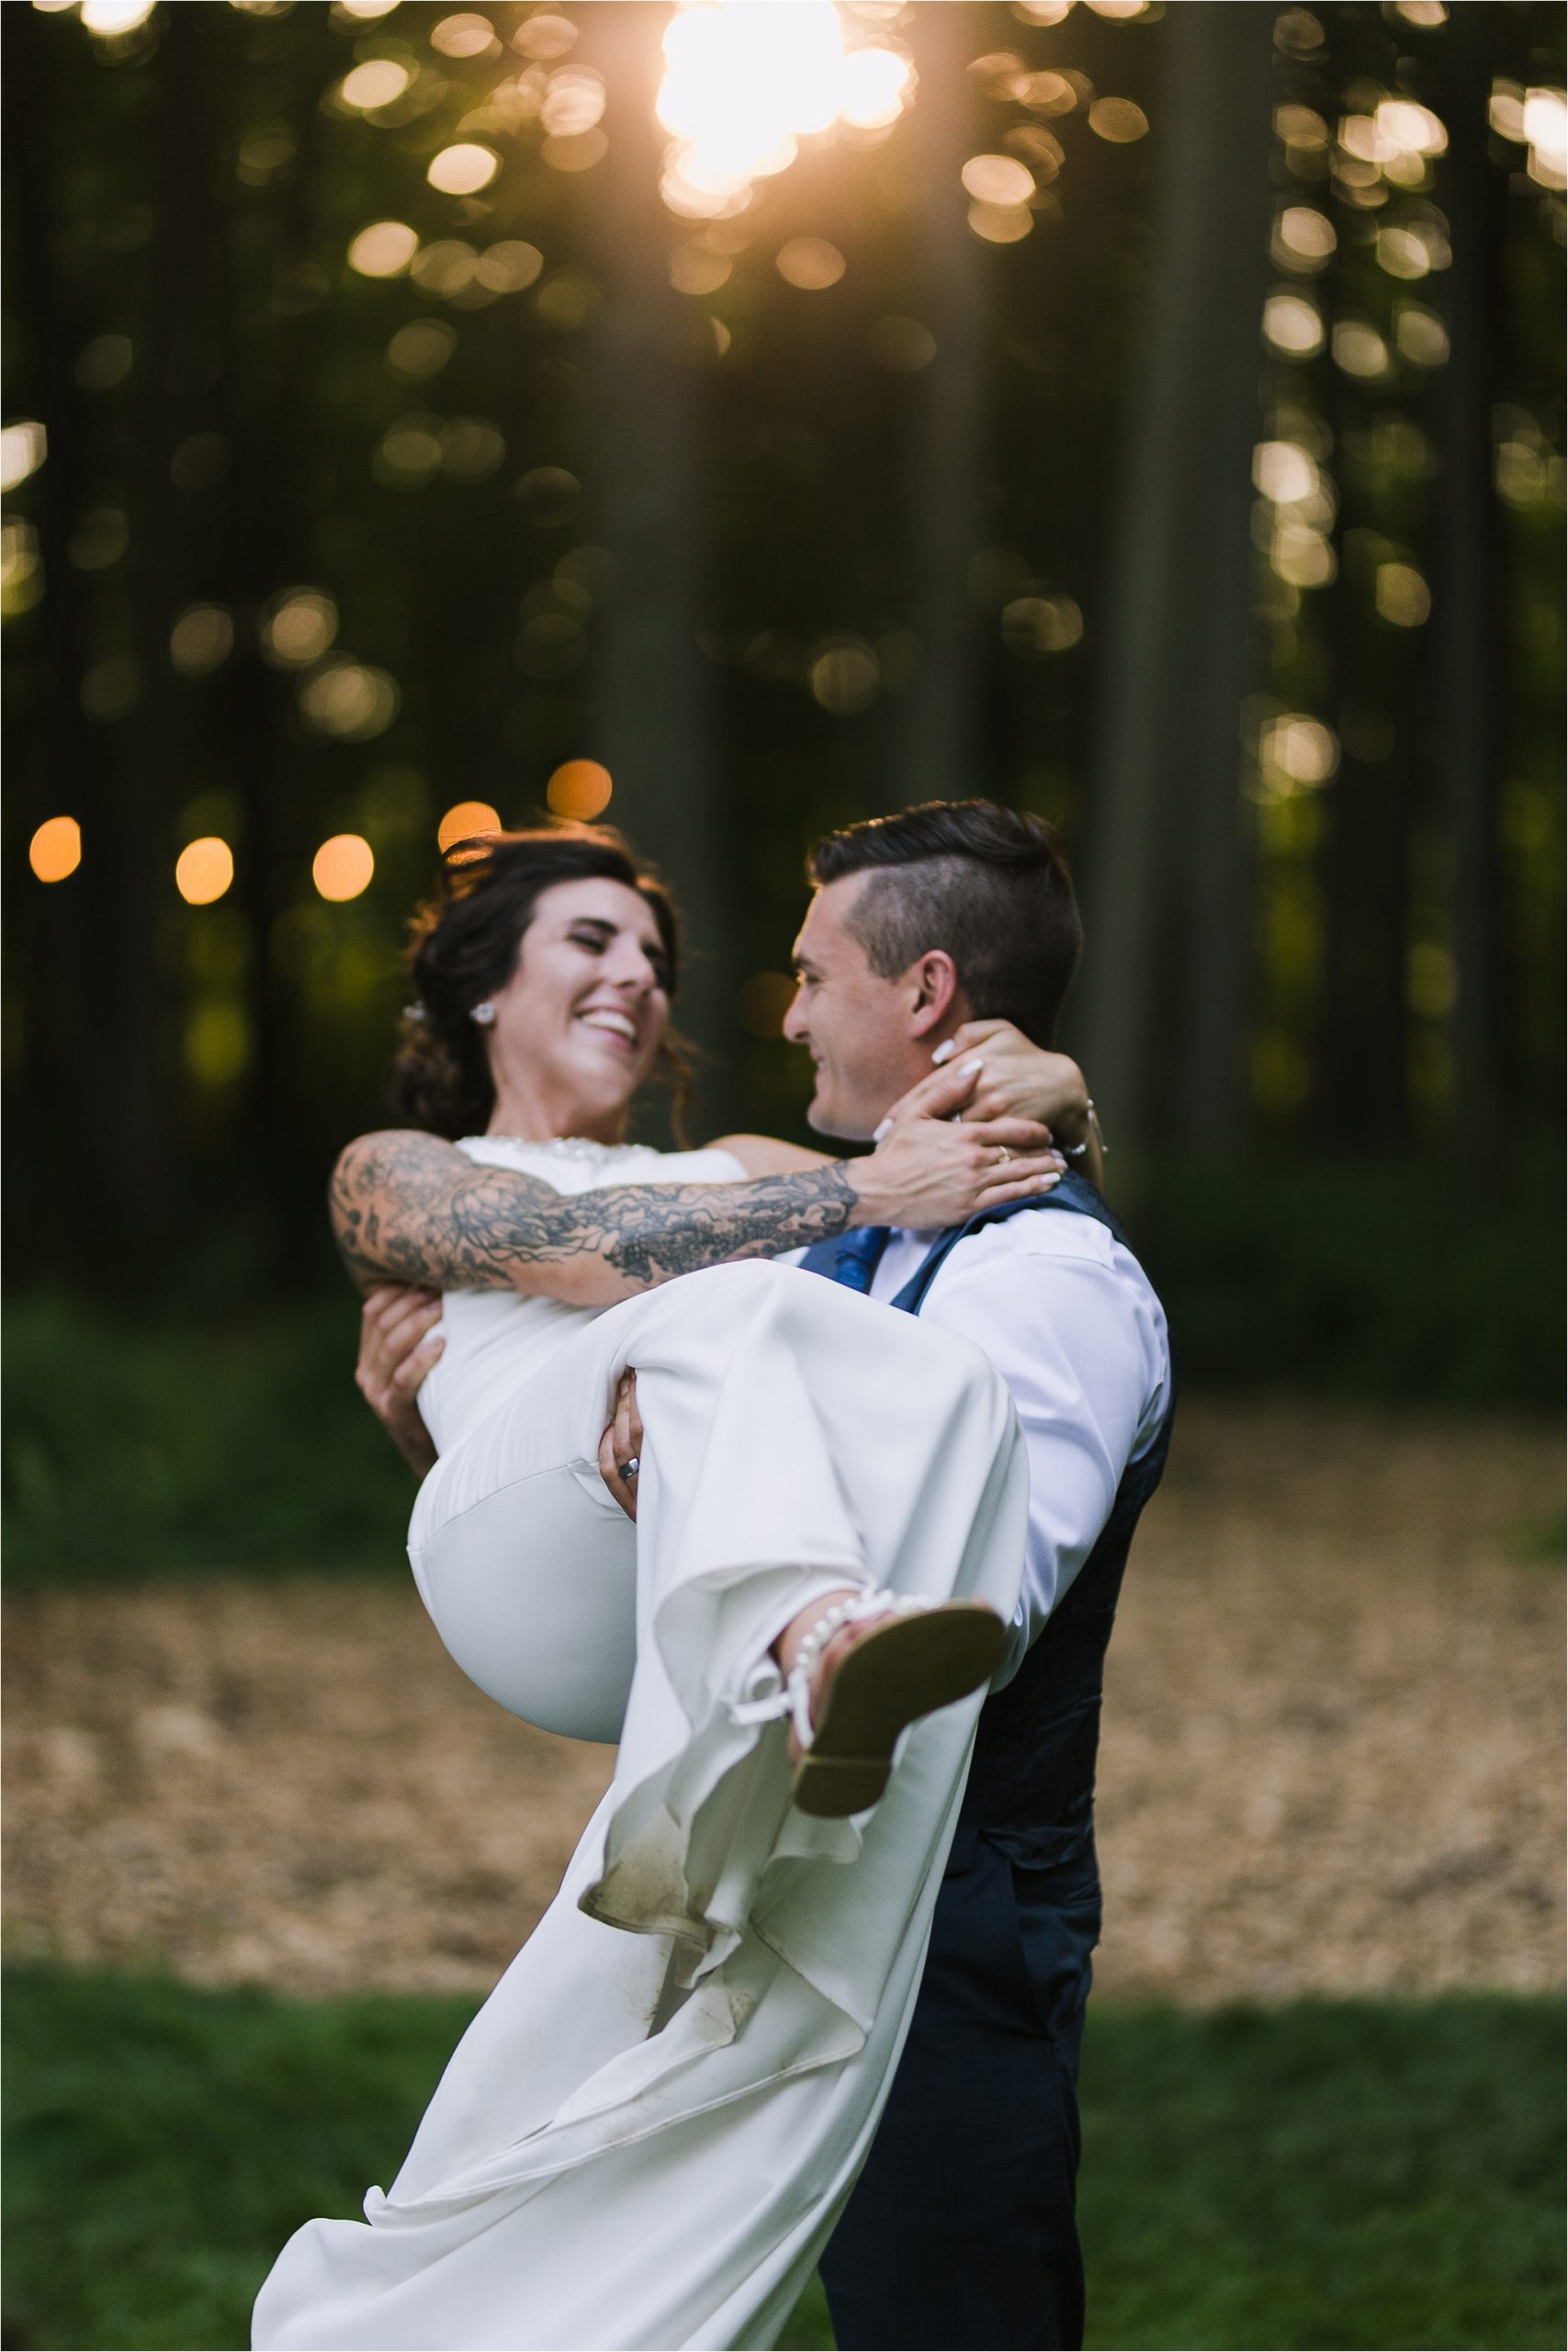 Sonia V Photography, The Clearing reception wedding venue, sunset golden hour bride and groom portraits